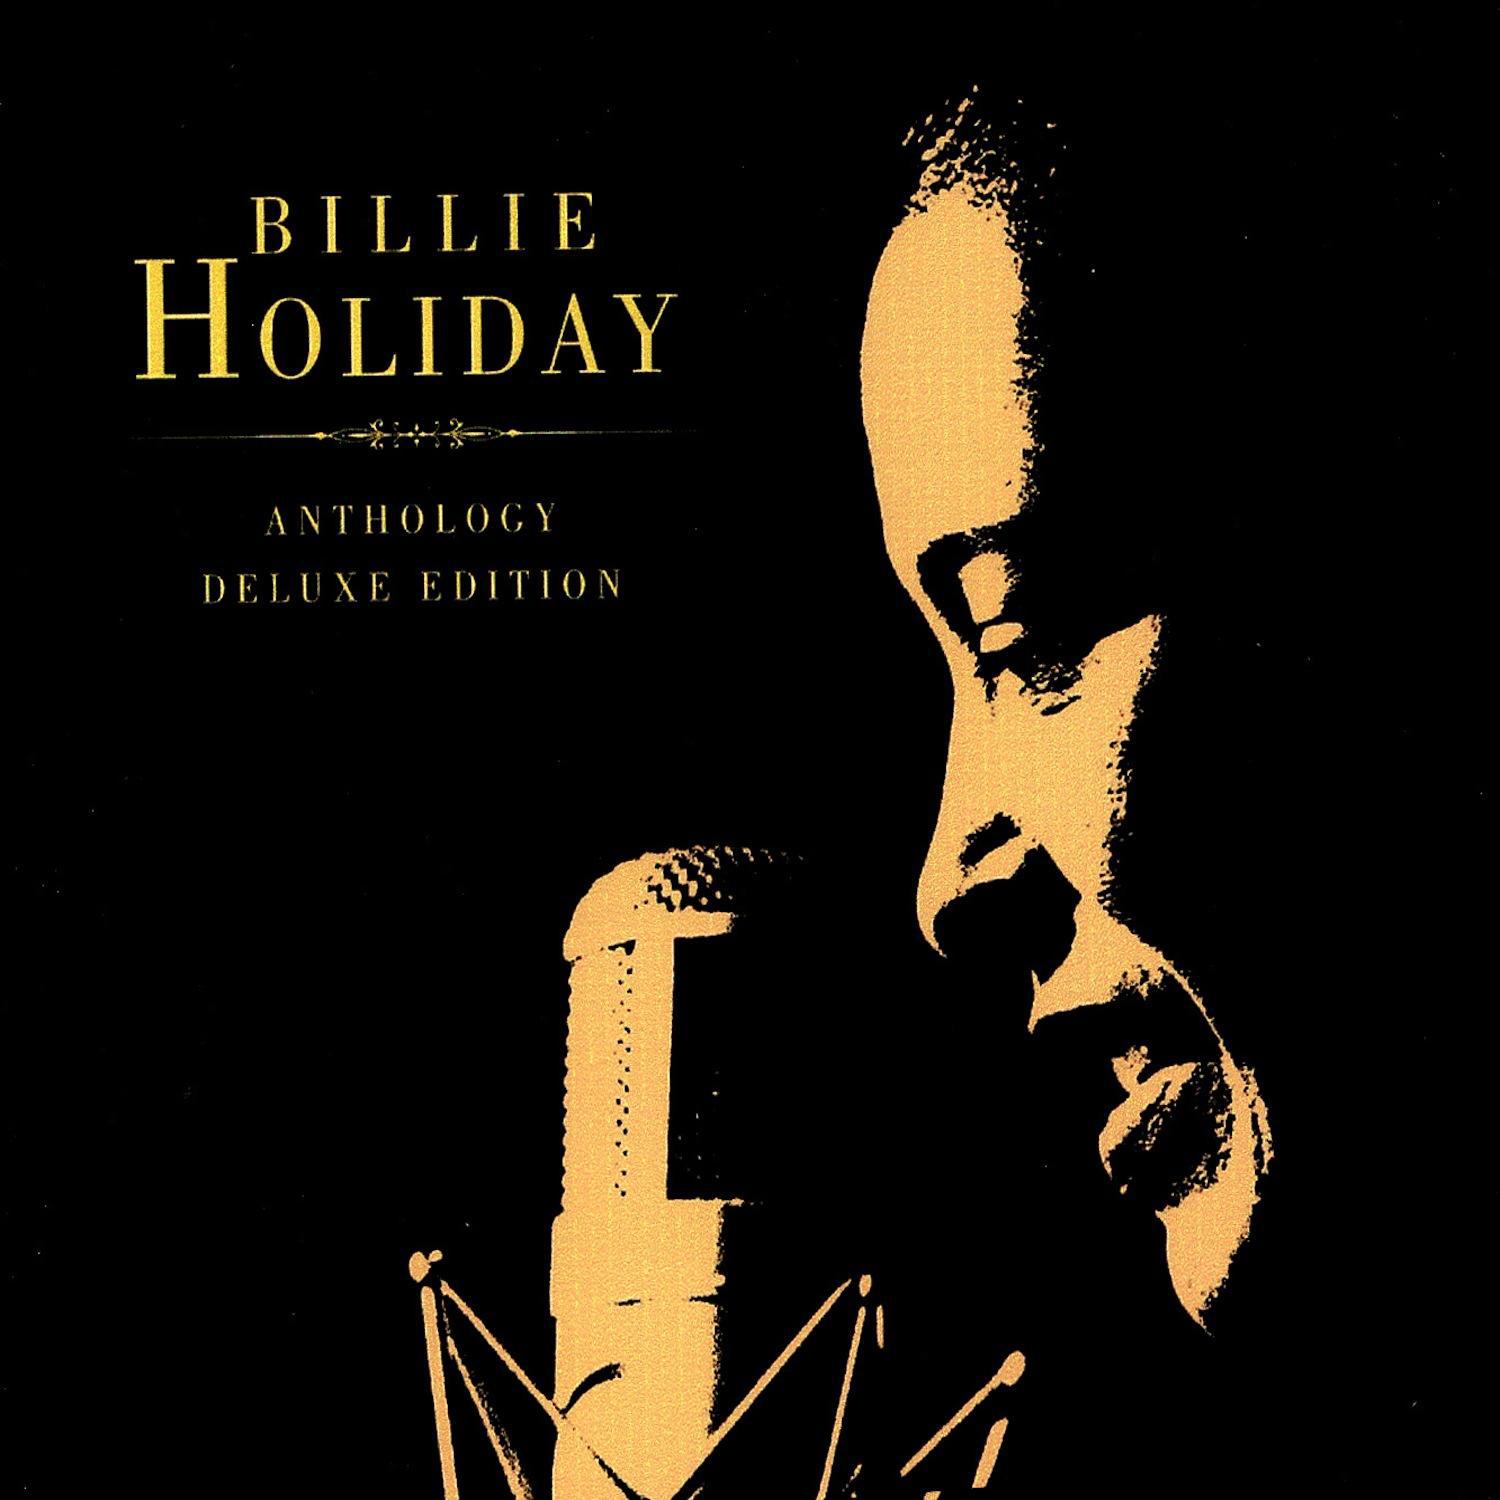 Billie Holiday: Anthology Deluxe Edition